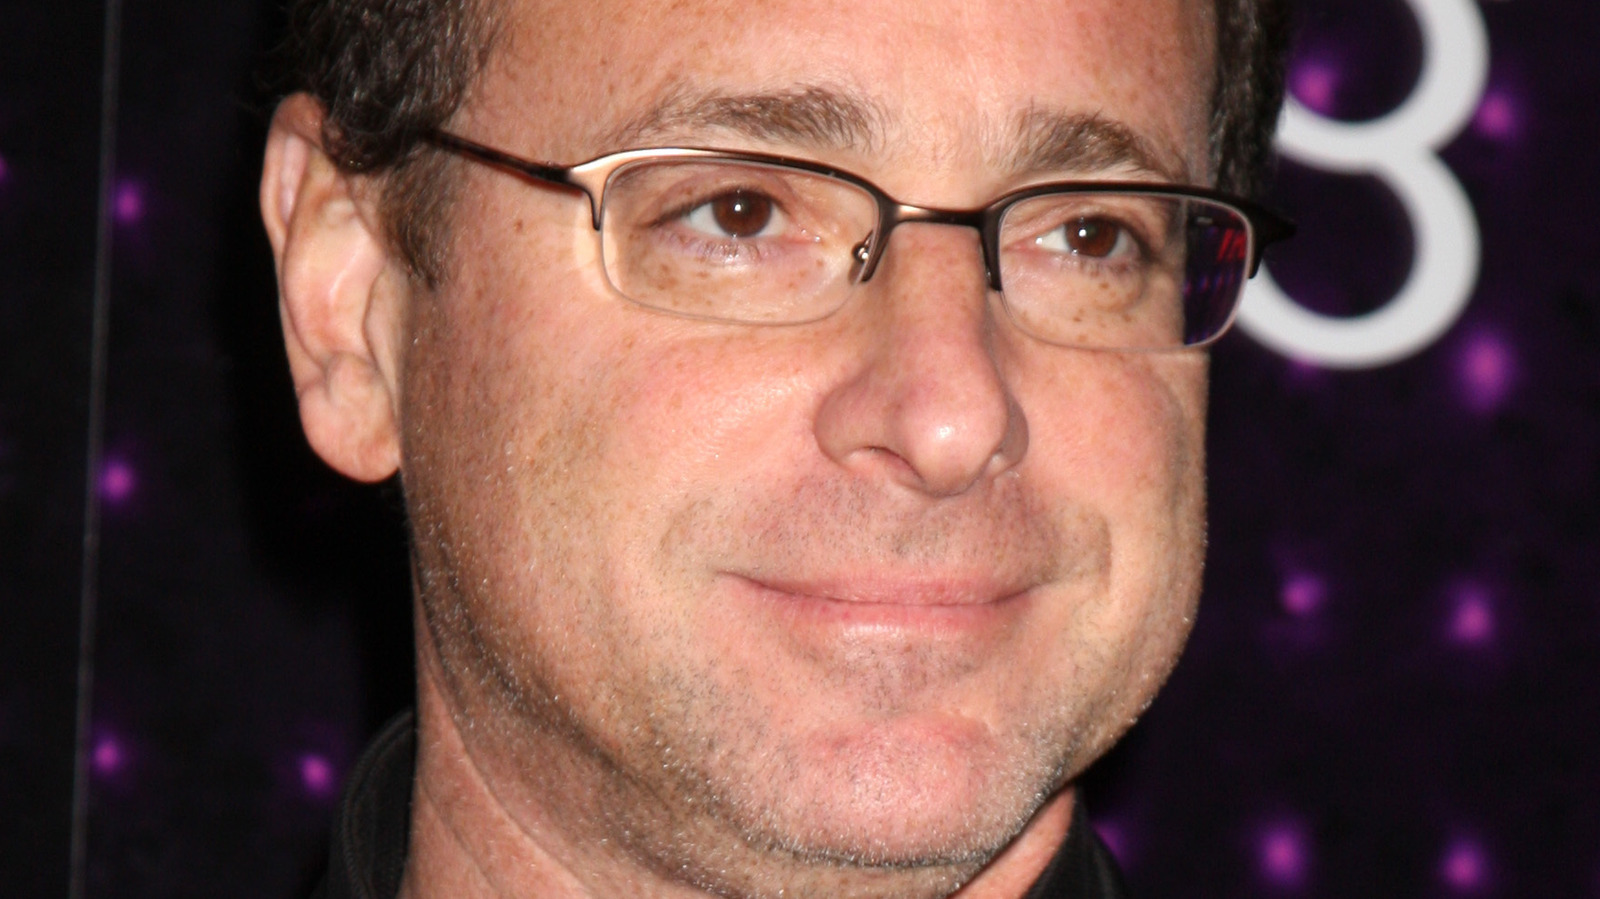 Here's what we know about Bob Saget’s autopsy results